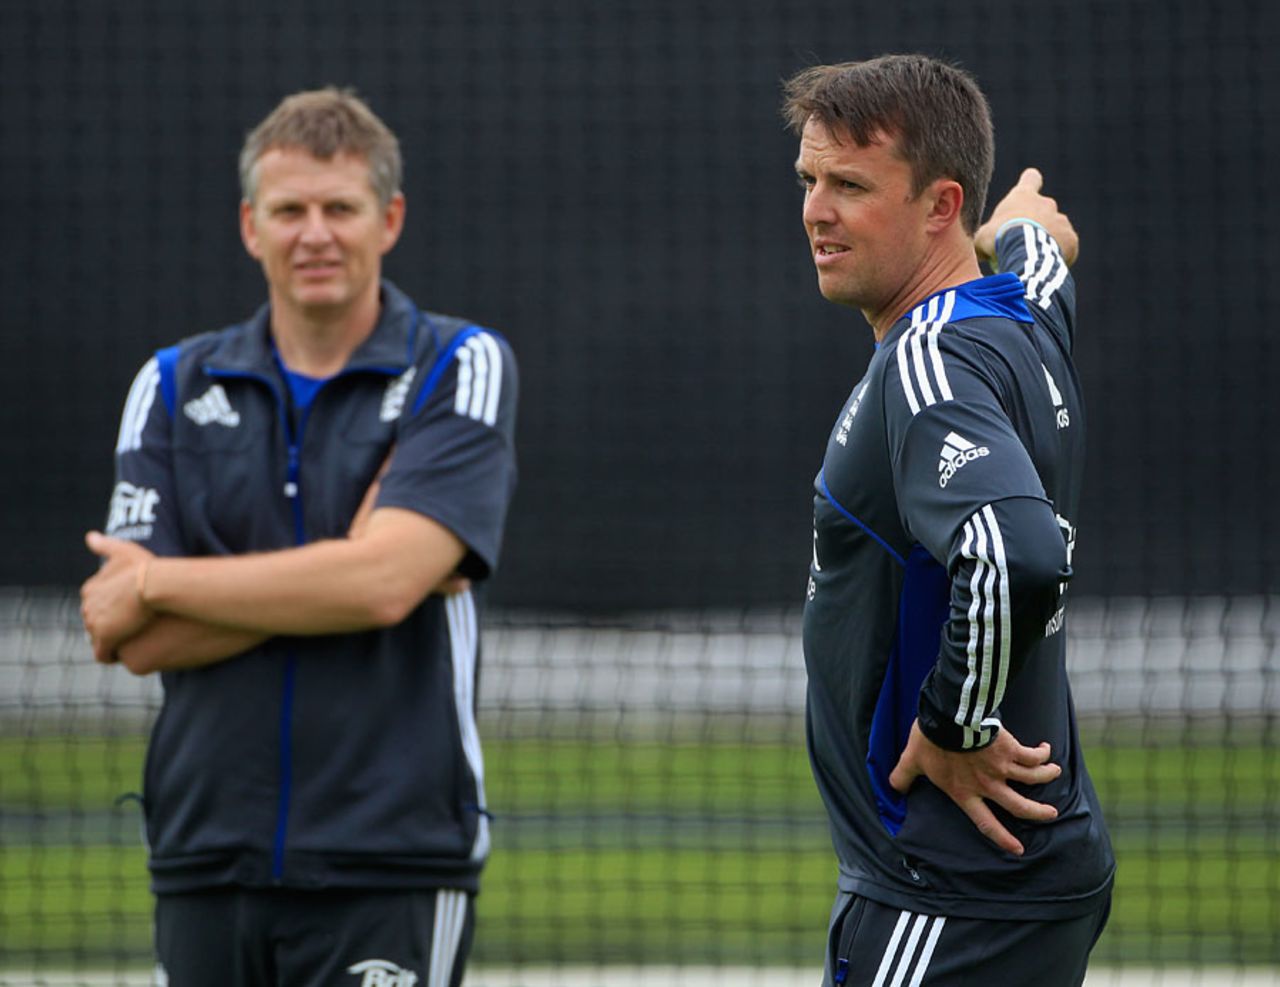 Graeme Swann chats with Peter Such during training, Lord's, June 27, 2012